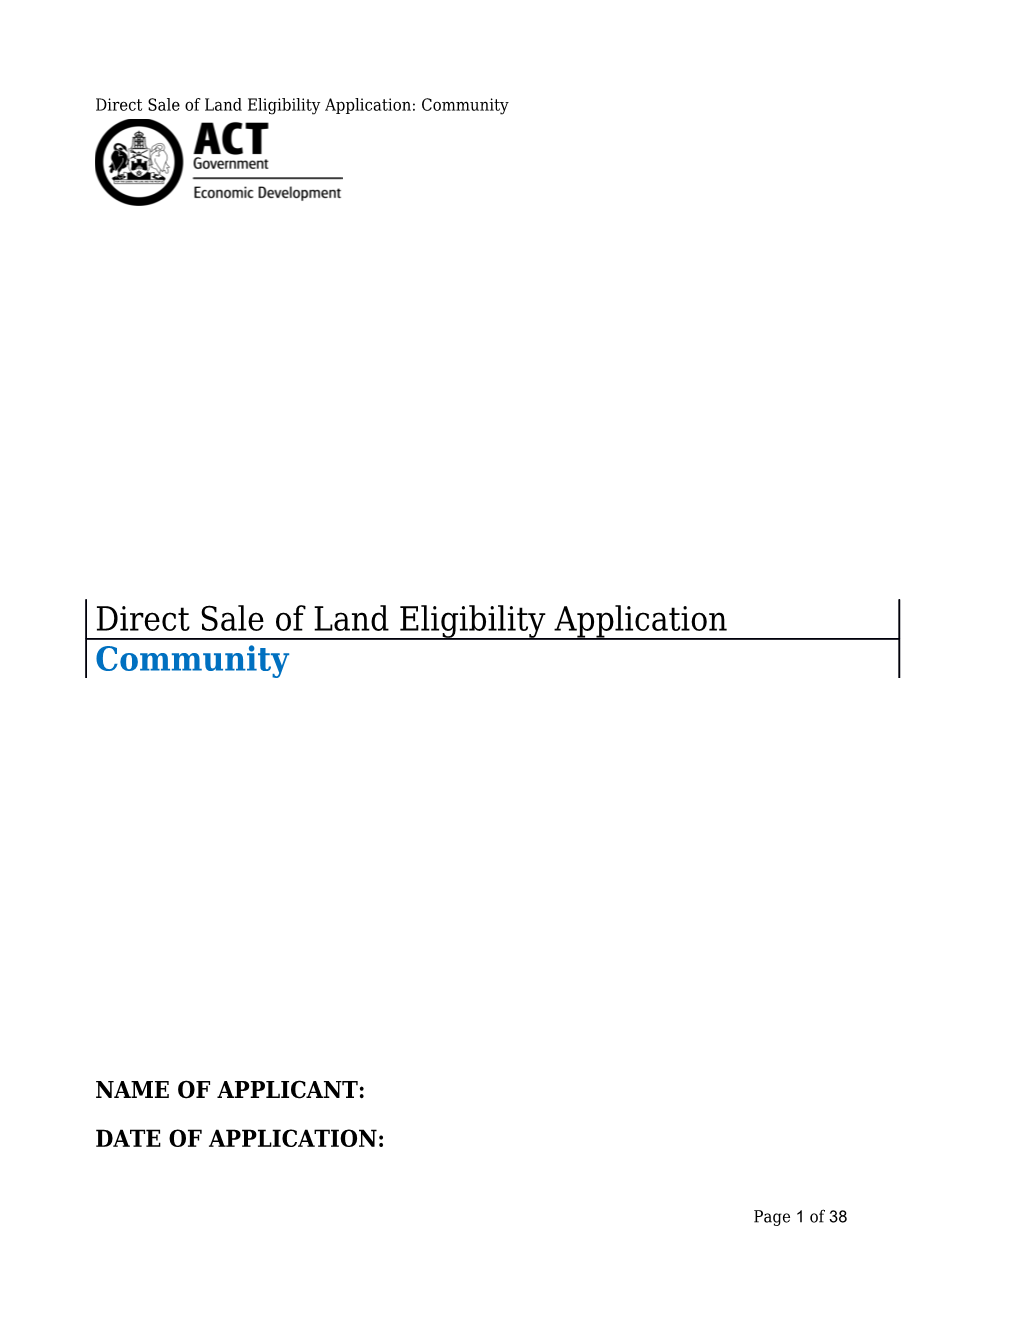 Direct Sale of Land Eligibility Application - Community